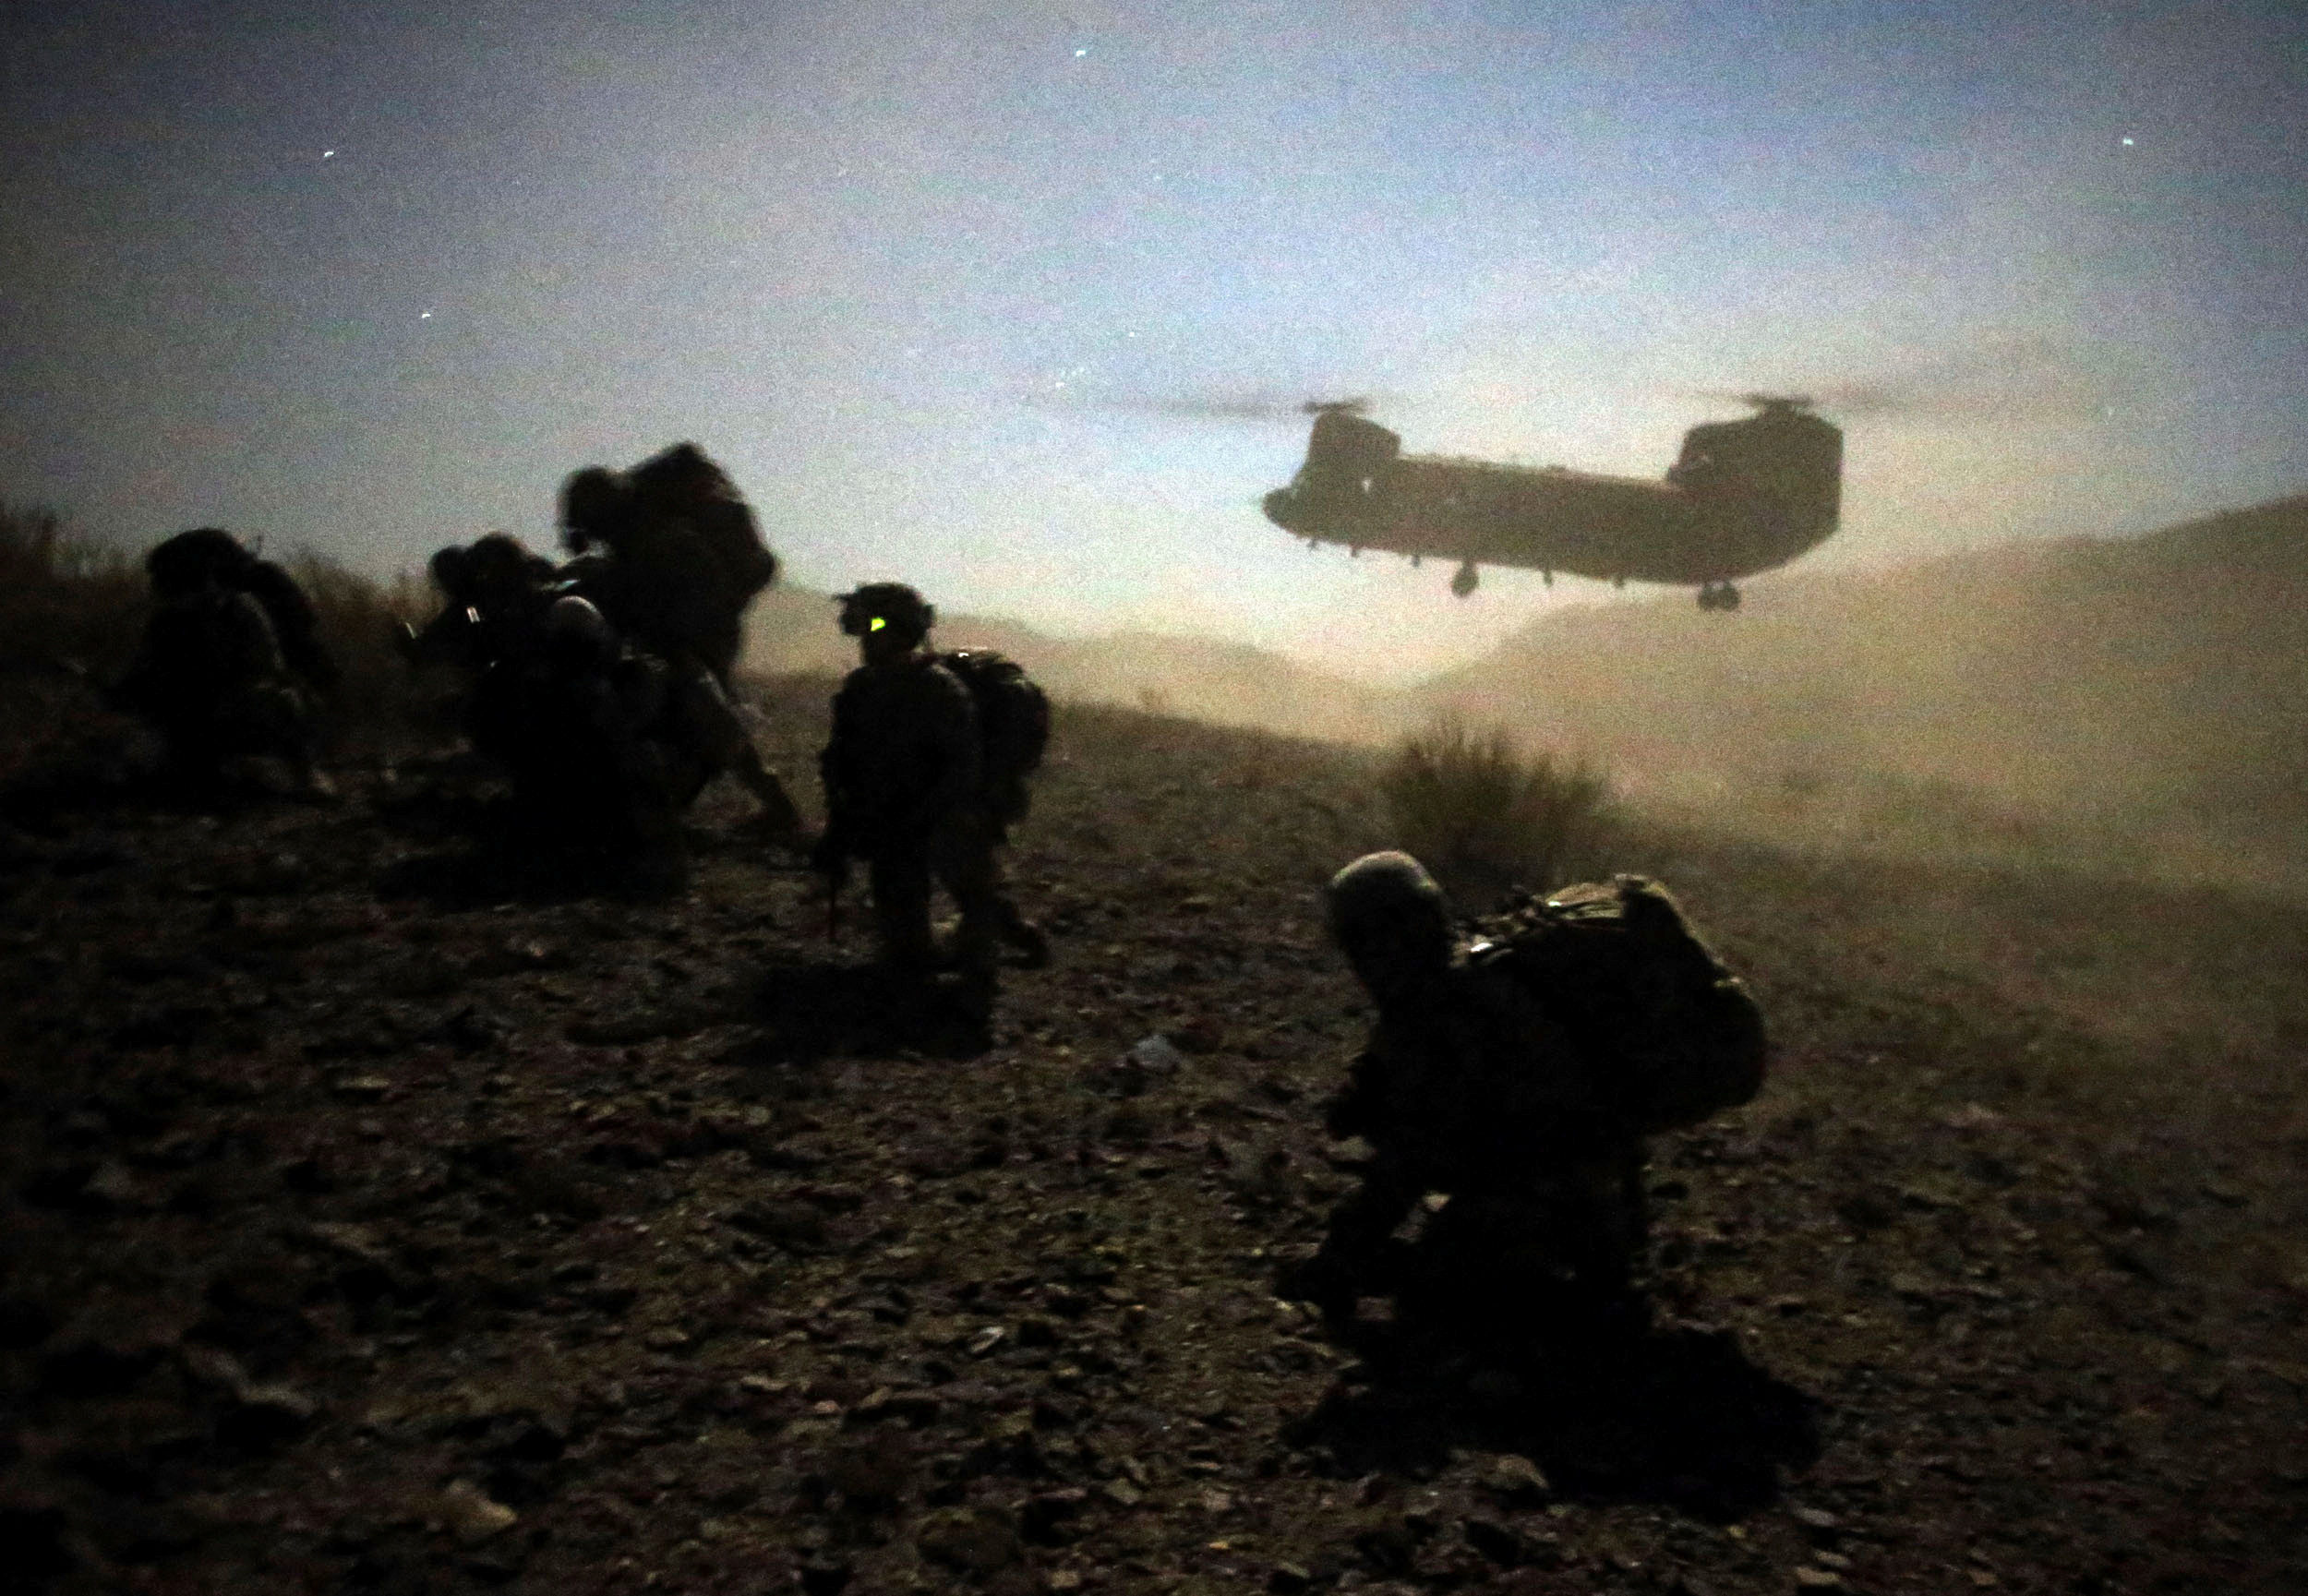 U.S. and Afghan soldiers take a knee near a U.S. Army Chinook during an operation near the town of Walli Was in Paktika province